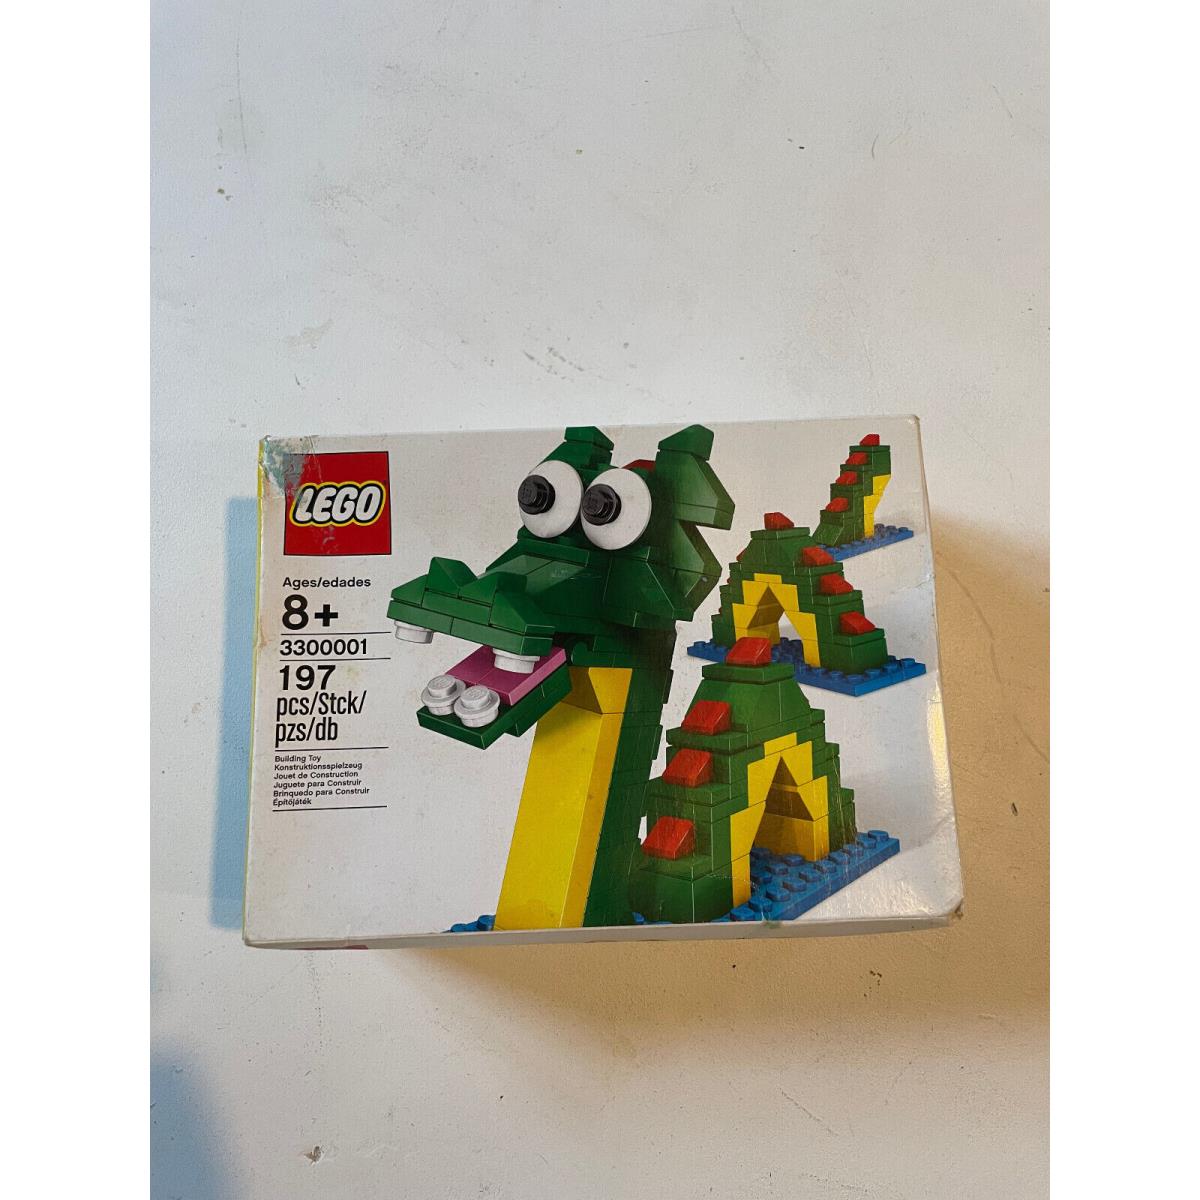 Lego Set 3300001 2011 Limited Edition Brickley The Sea Serpent New/sealed